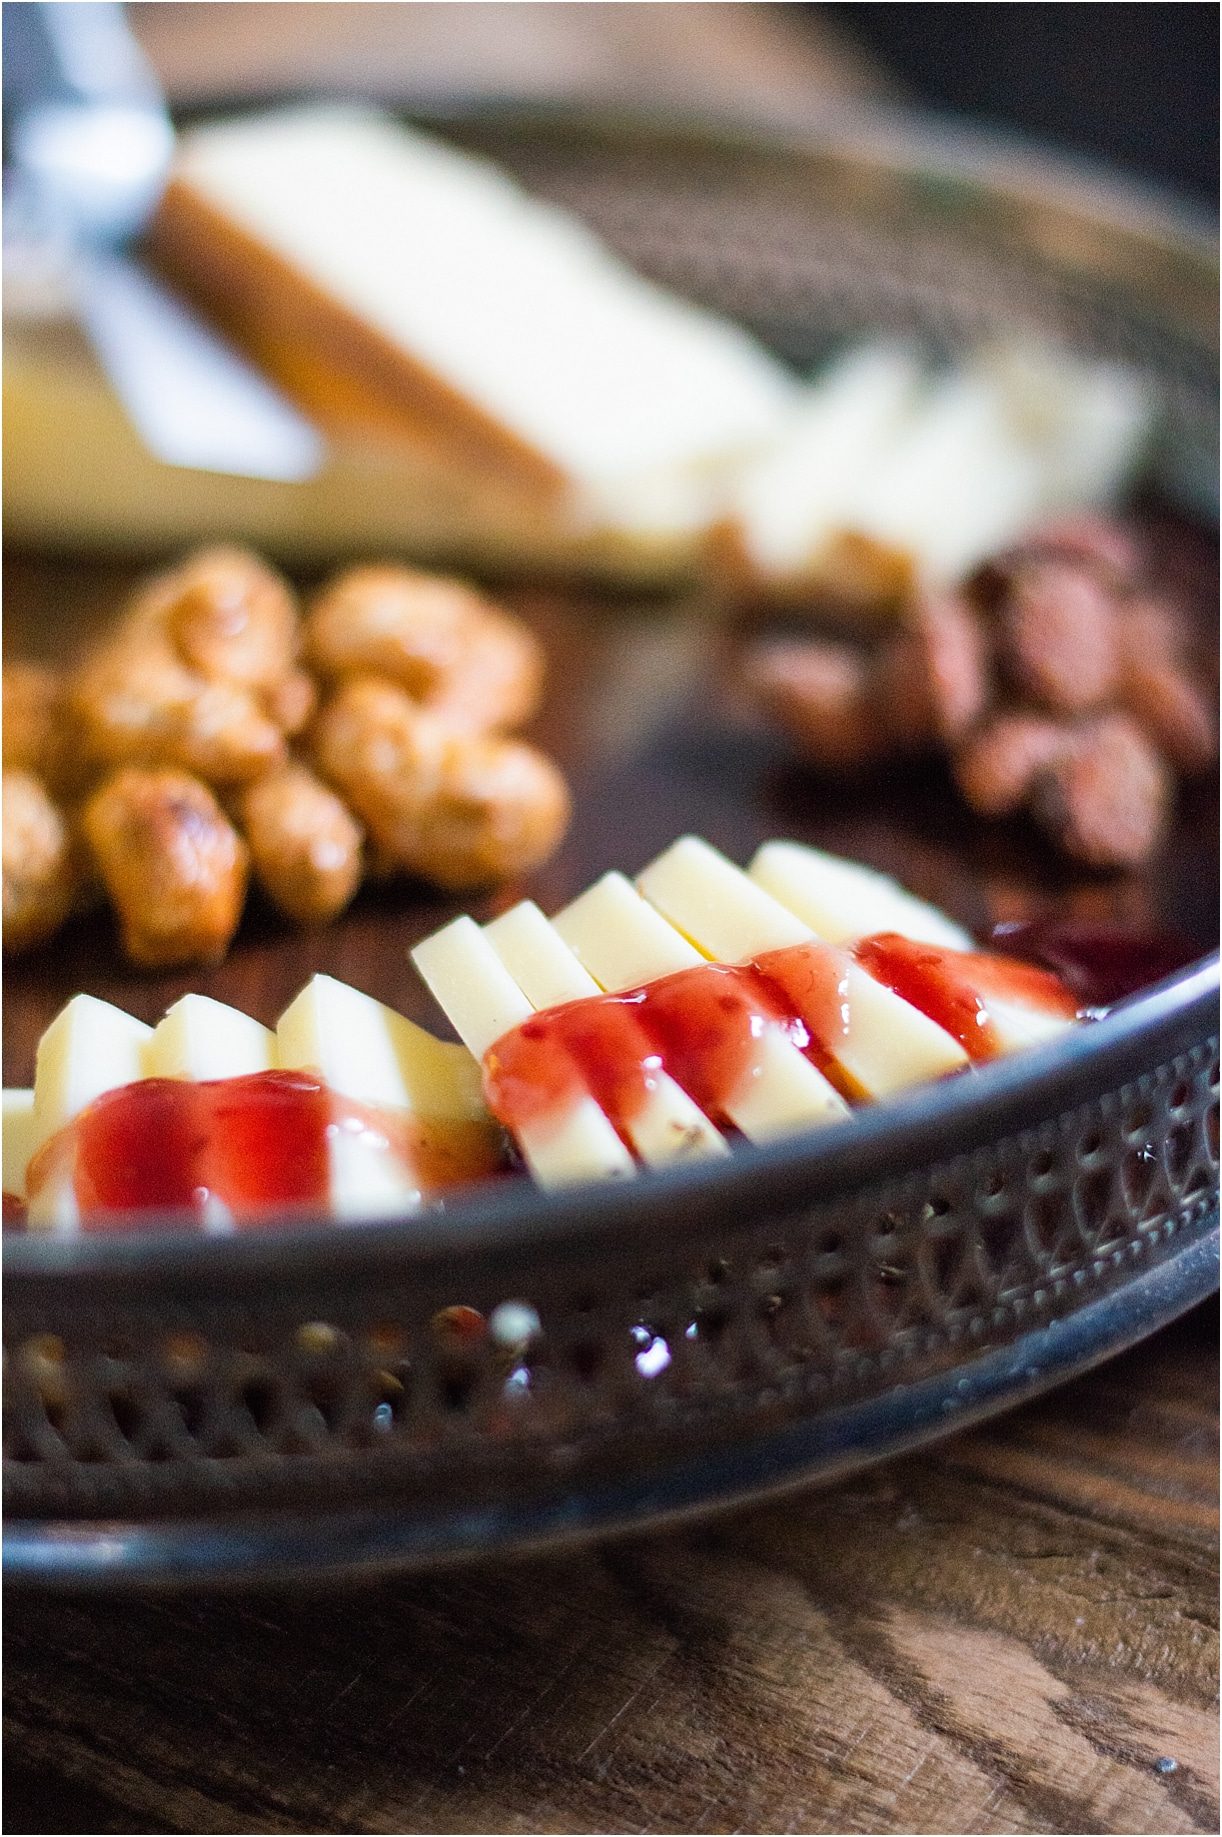 Date Night Ideas Cheese Board Cocktails Recipe Cocktail Drinks | Hill City Bride Virginia Weddings Chocolate Martini Raspberry Lemonade Refresher Spiked Drizzle